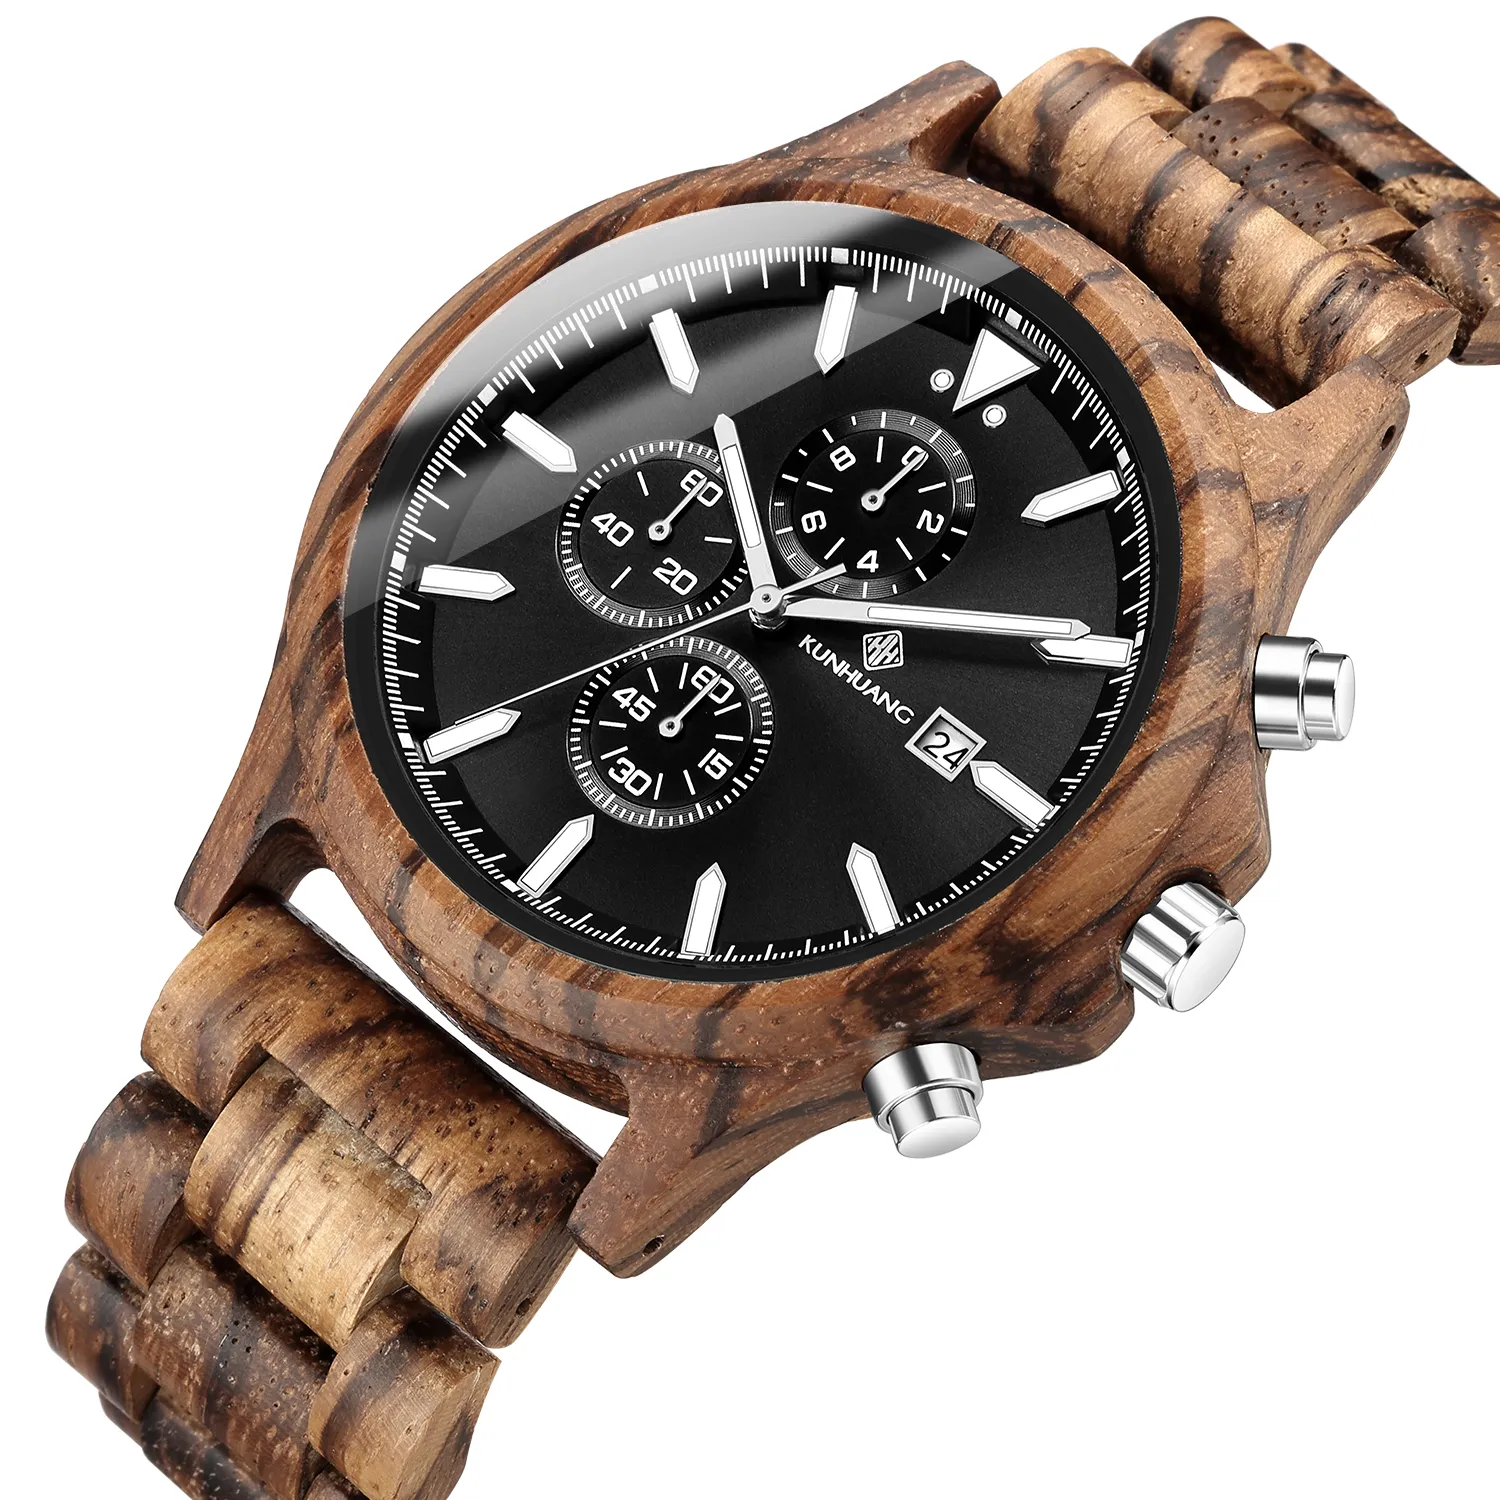 Men Wood Watch Chronograph Luxury Military Sport Watches Stylish Casual Personalized Wood Quartz Watches266h